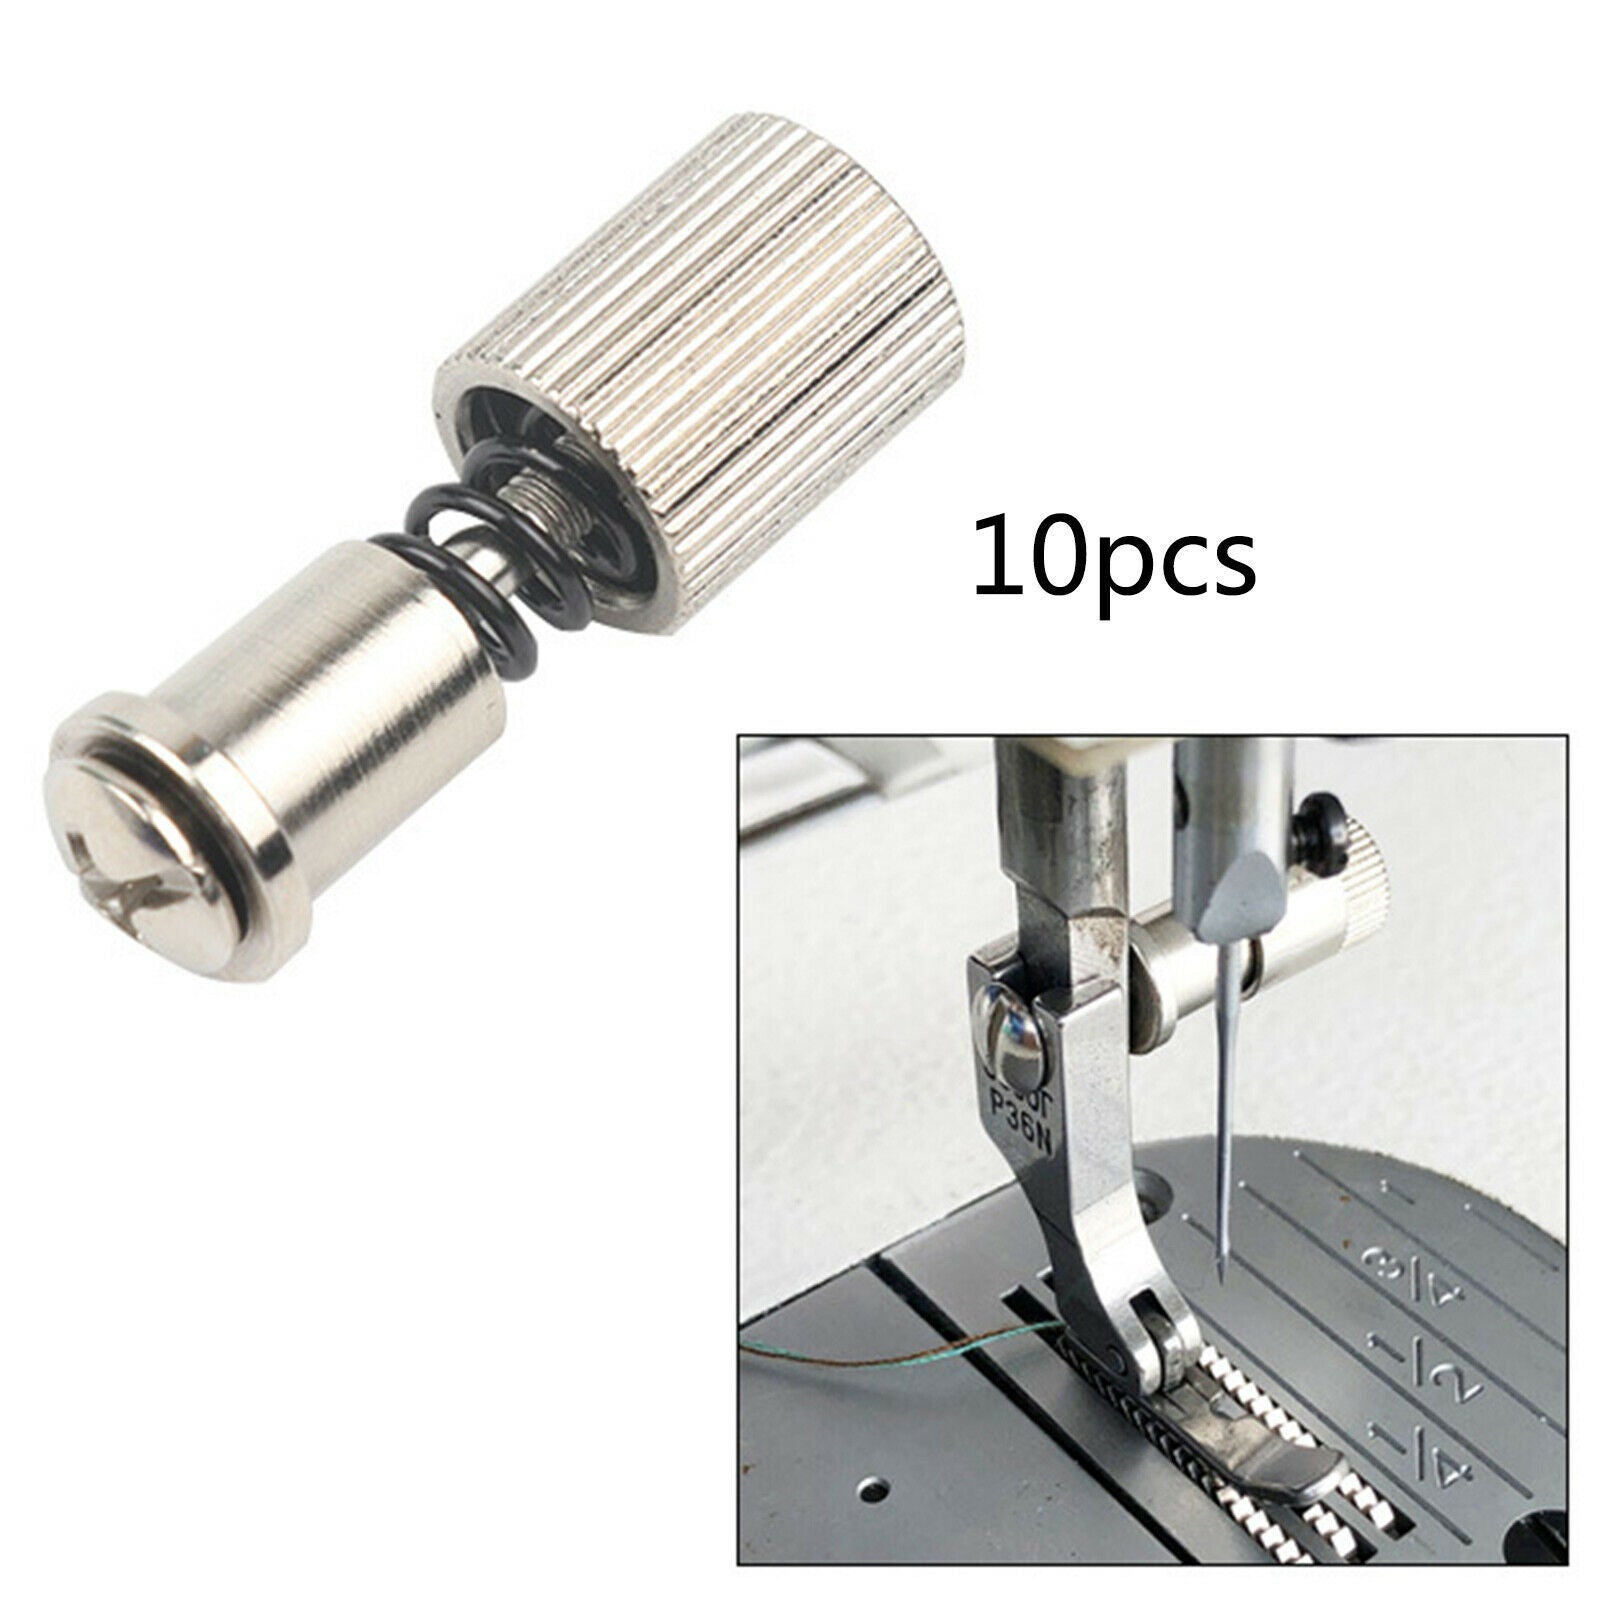 Sewing Machine Spring Foot Clamp for Quick Presser Foot Change Attachments